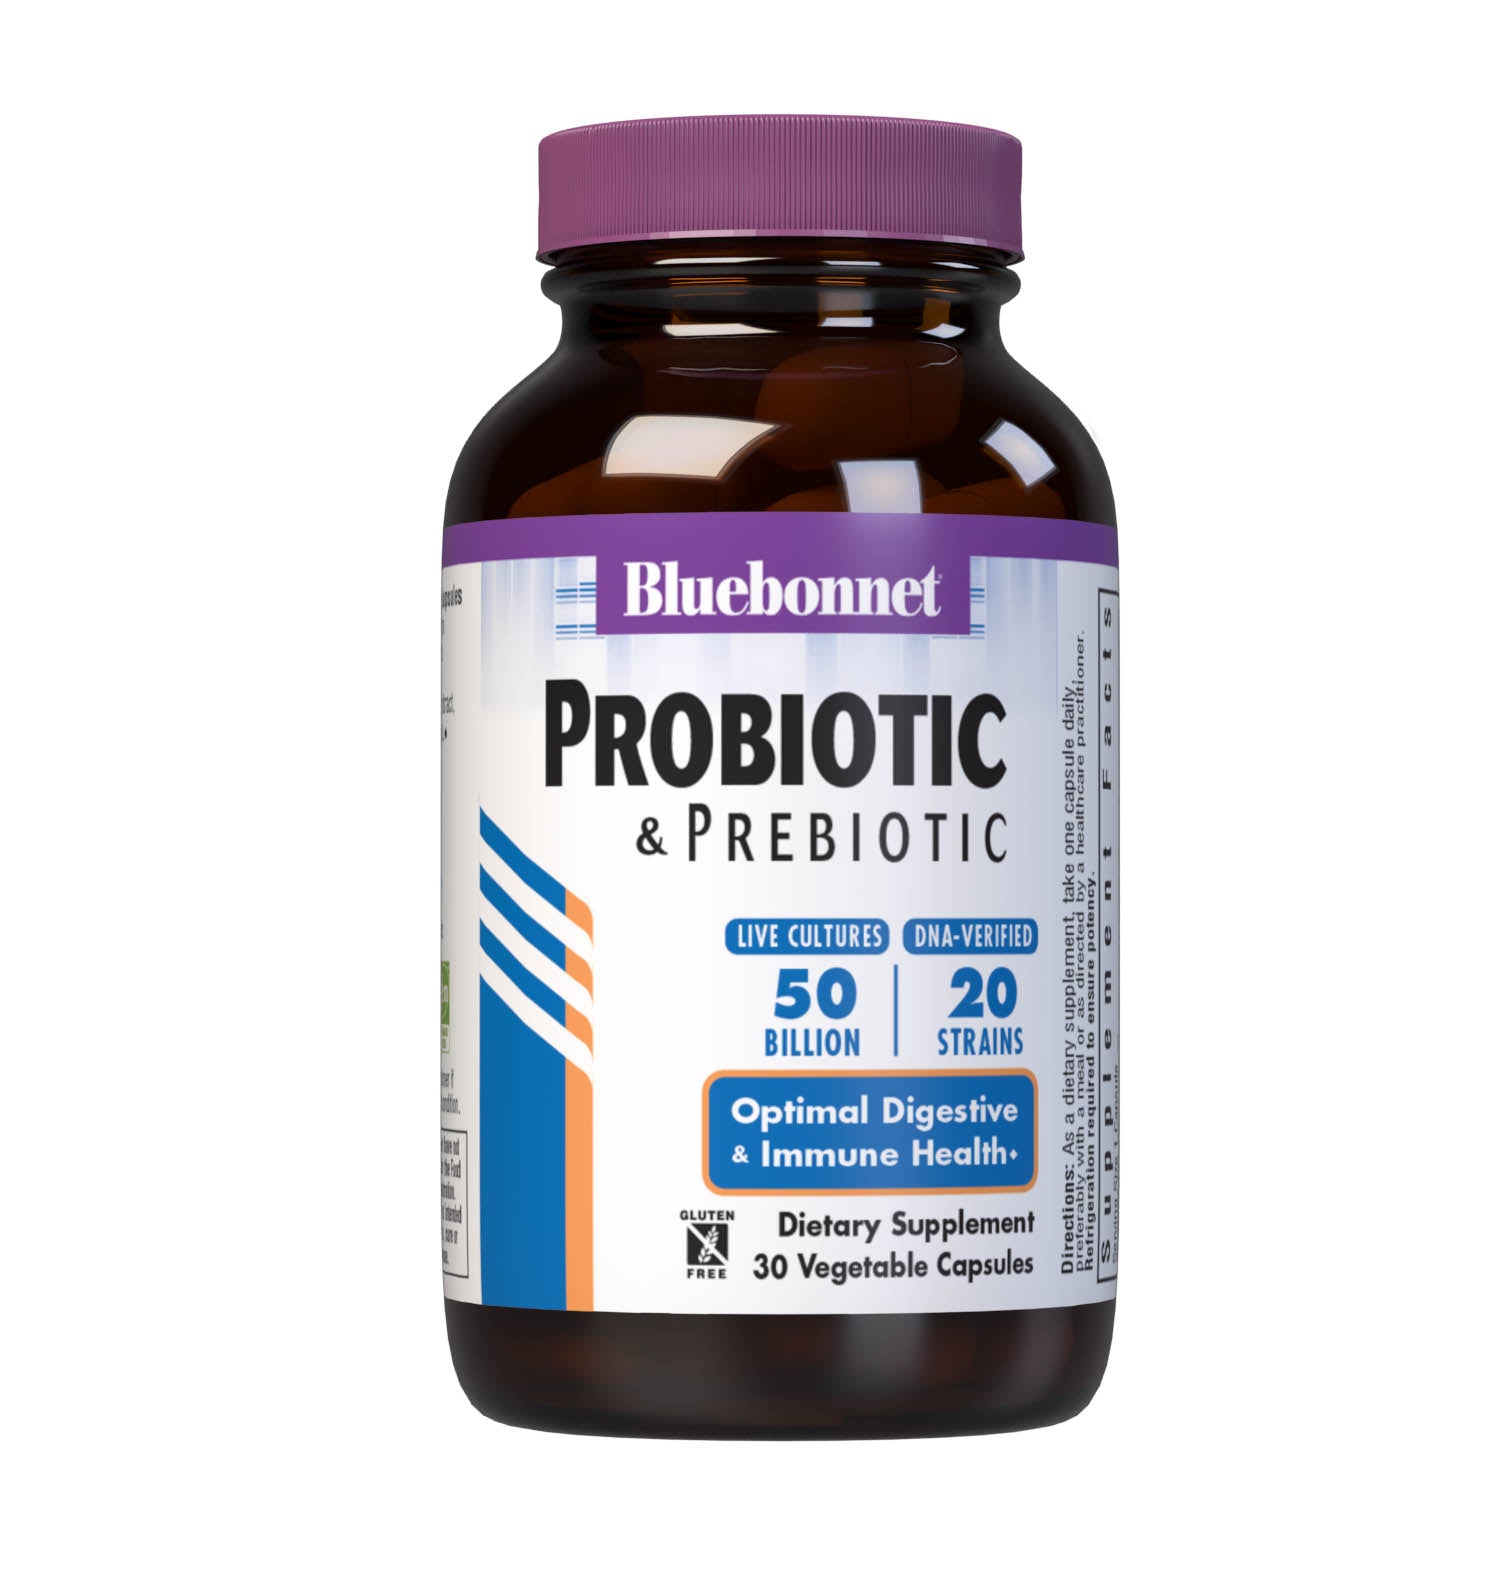 Bluebonnet’s Probiotic & Prebiotic 30 Vegetable Capsules are formulated with 50 billion viable cultures from 20 DNA-verified, scientifically supported strains. This unique, science-based probiotic formula includes the prebiotic inulin from chicory root extract, to assist the growth of friendly bacterium in the gut. #size_30 count